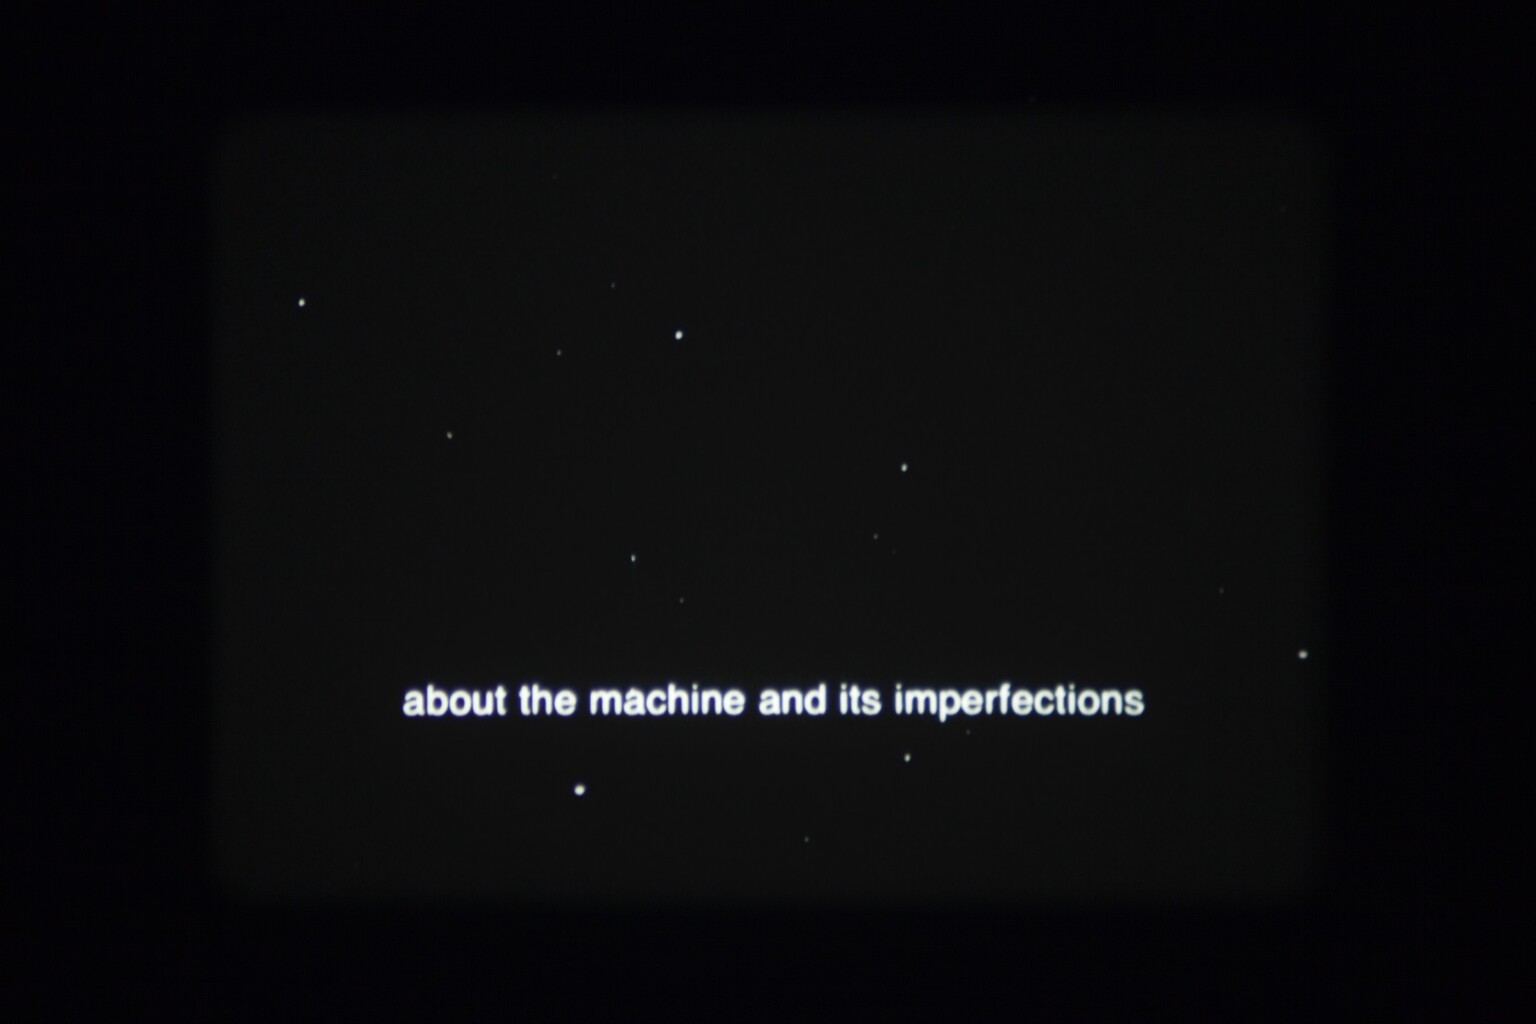 Image caption: Joachim Koester, Of Spirits and Empty Spaces (2012), 16mm film animation. 